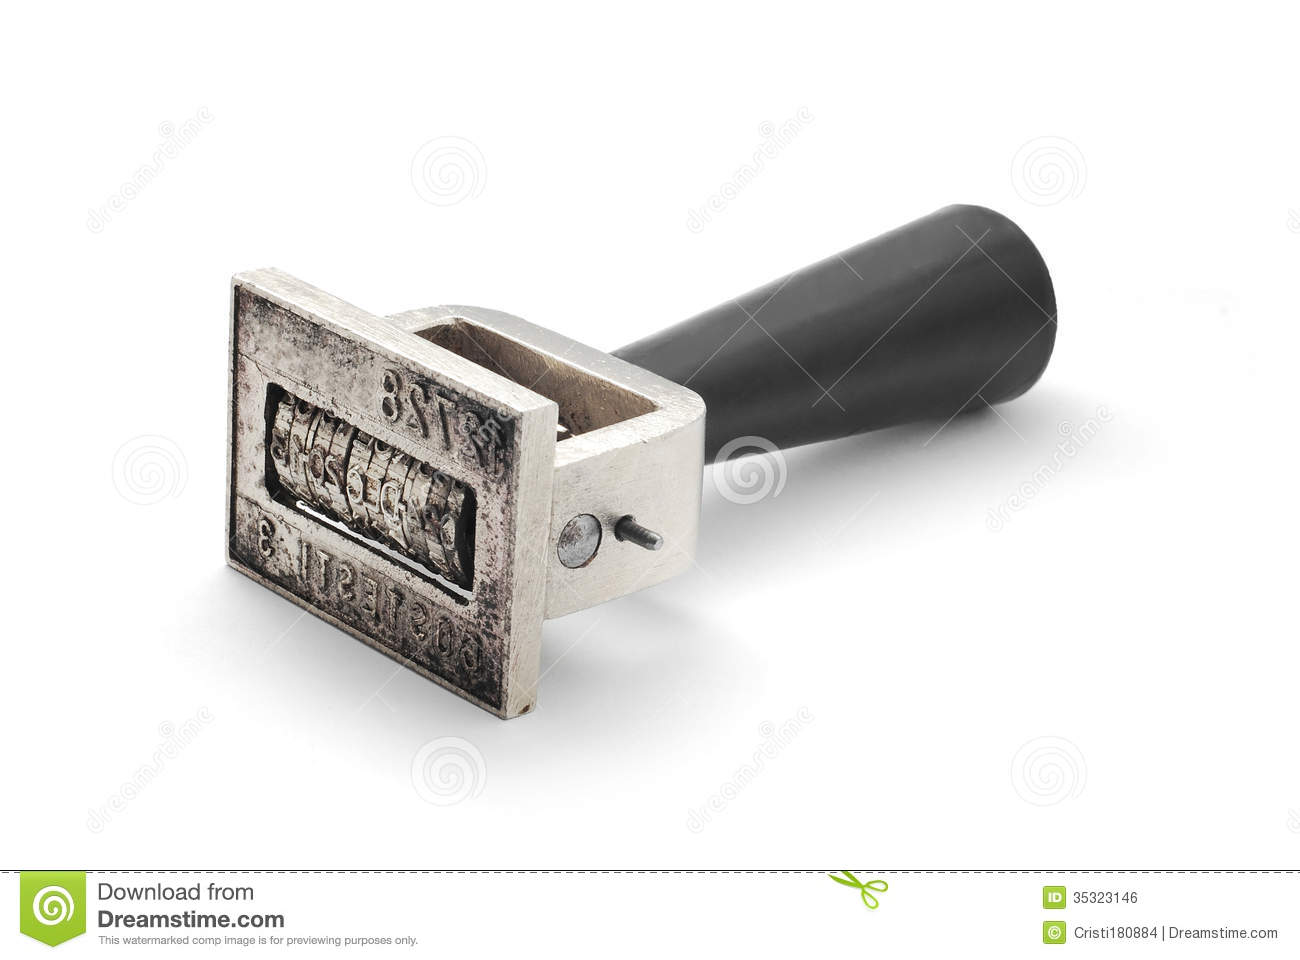 Old Date Stamper Royalty Free Stock Image   Image  35323146